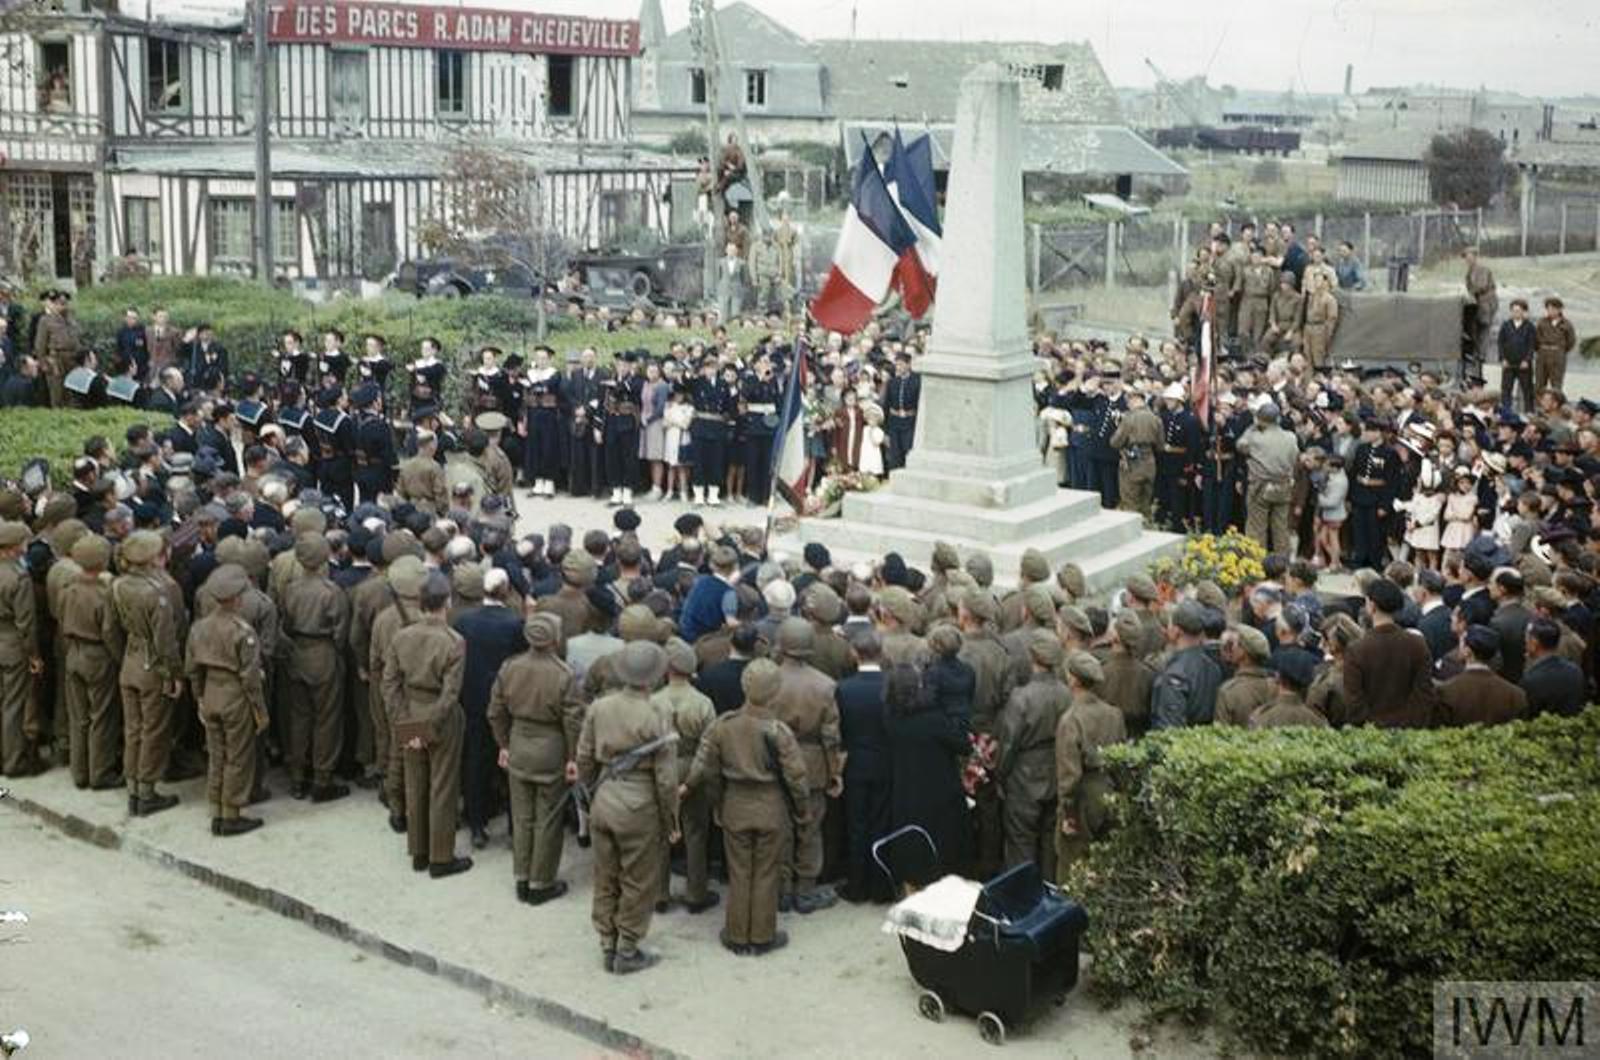 British and American troops join with residents of Courseulles-sur-Mer in Bastille Day ceremonies at the town’s War Memorial. Courseulles-sur-Mer was the first town in Normandy to be liberated by the Allies.